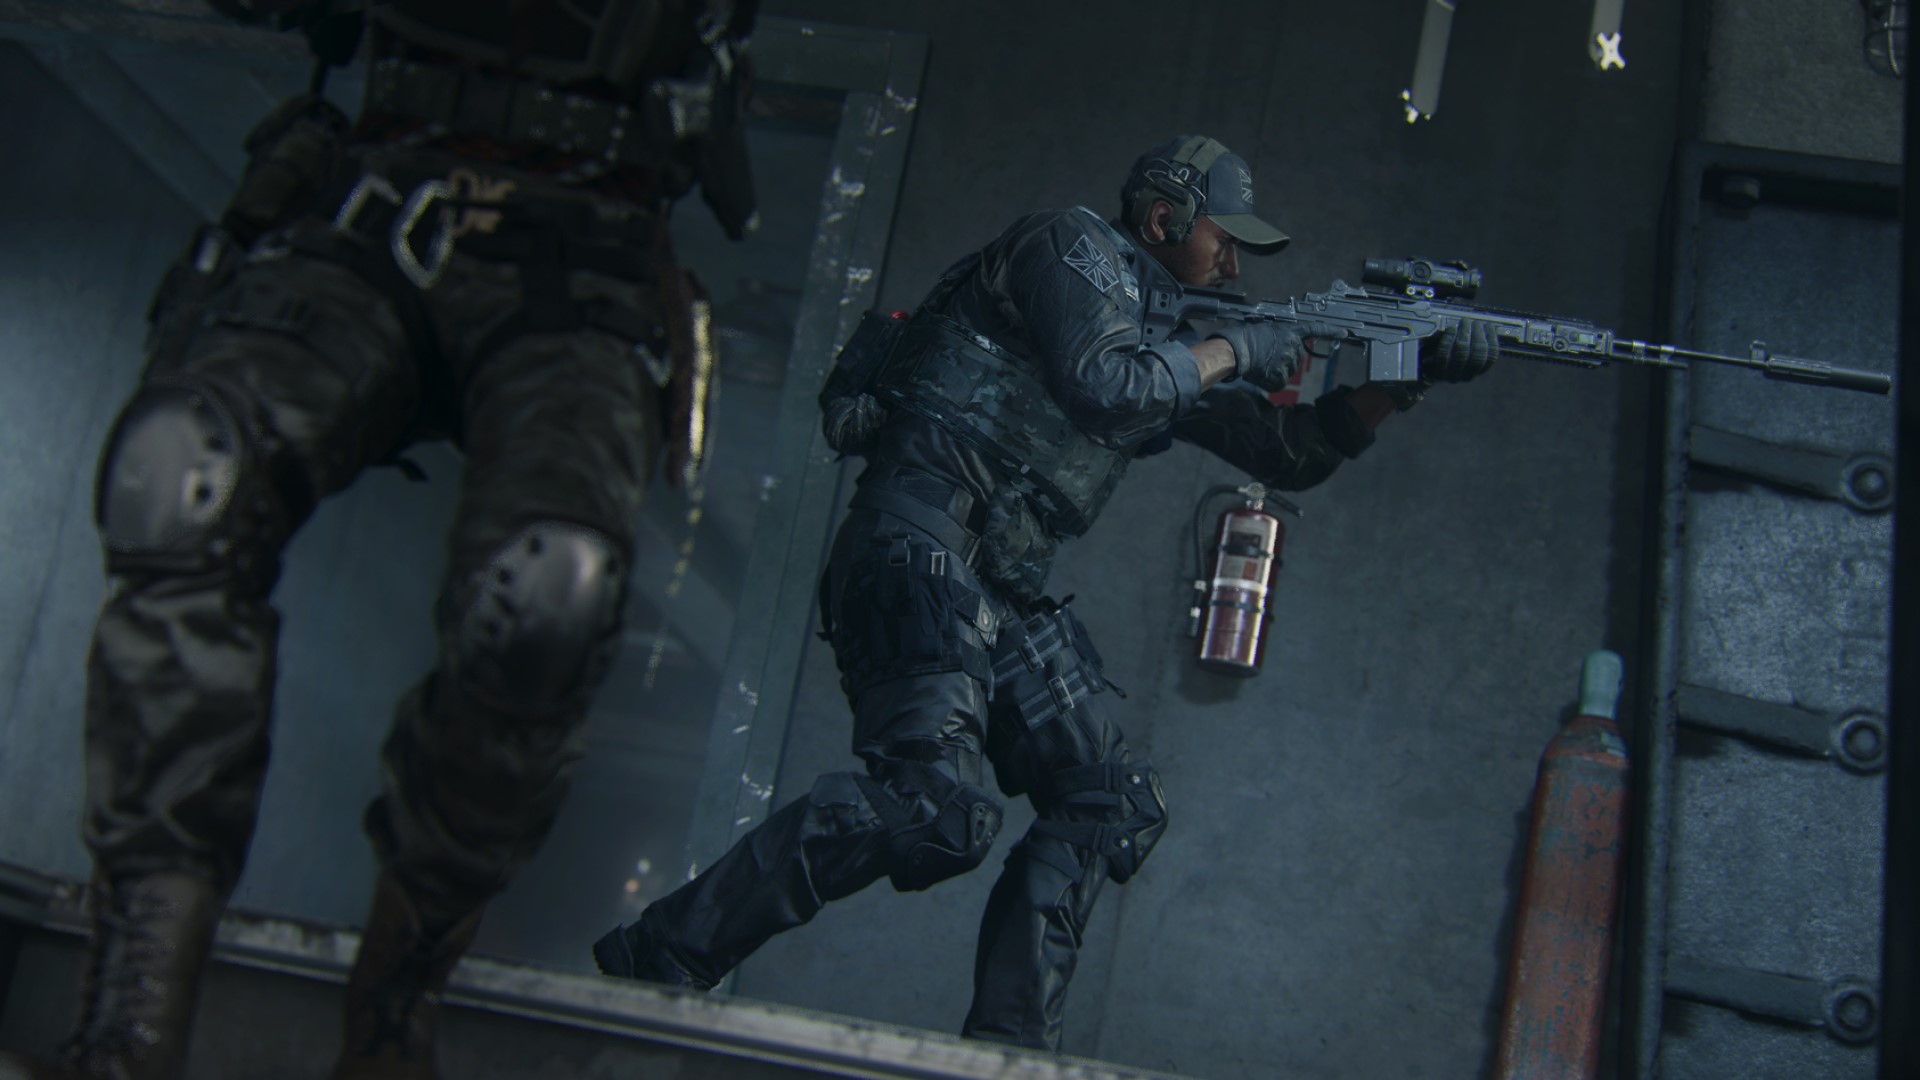 Call of Duty Warzone DMZ's new Building 21 has been locked down